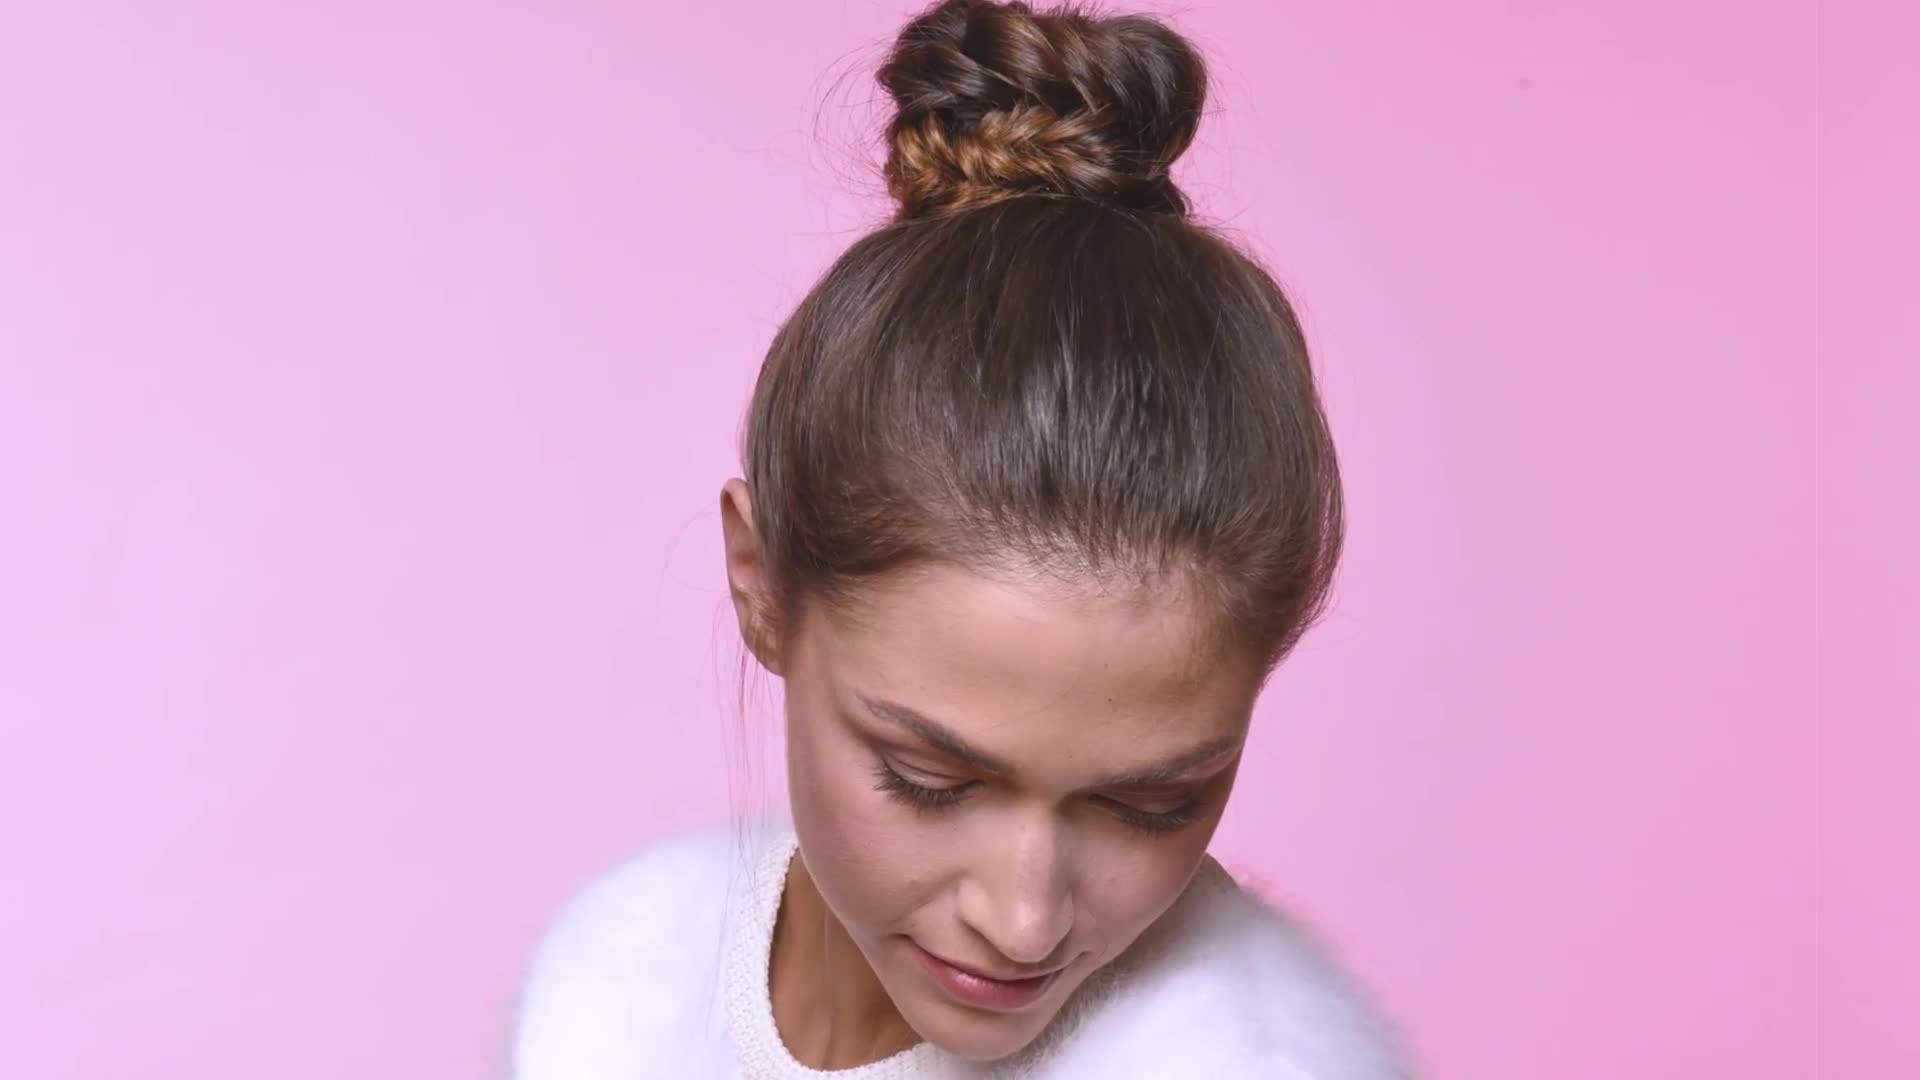 Watch Fishtail Top Knot Hairstyle Tutorial | Beauty 101 | Allure